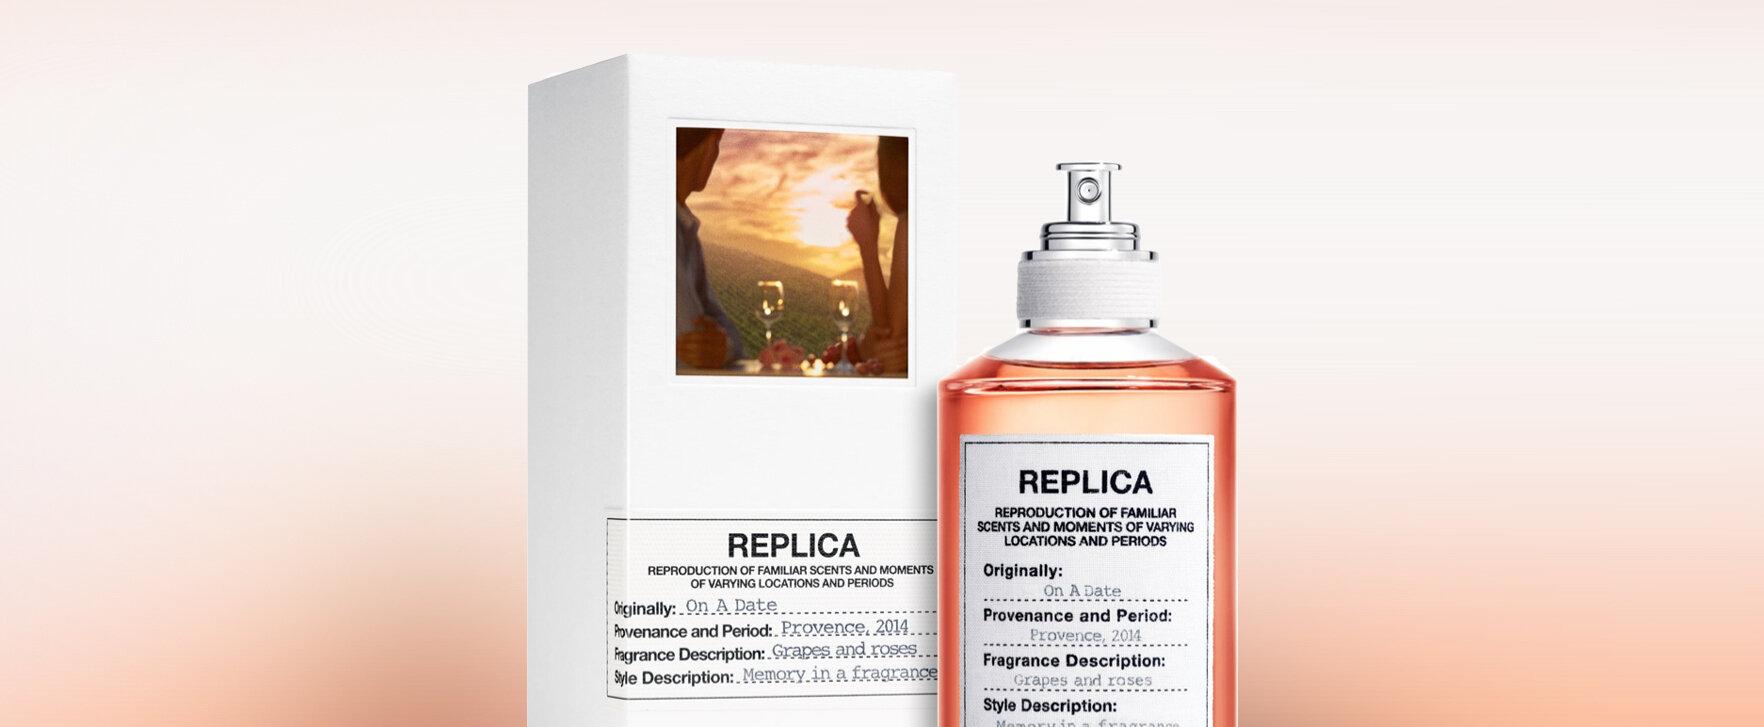 “Replica - On a Date” - New Fragrance by Maison Margiela Inspired by the Vineyards of Provence.